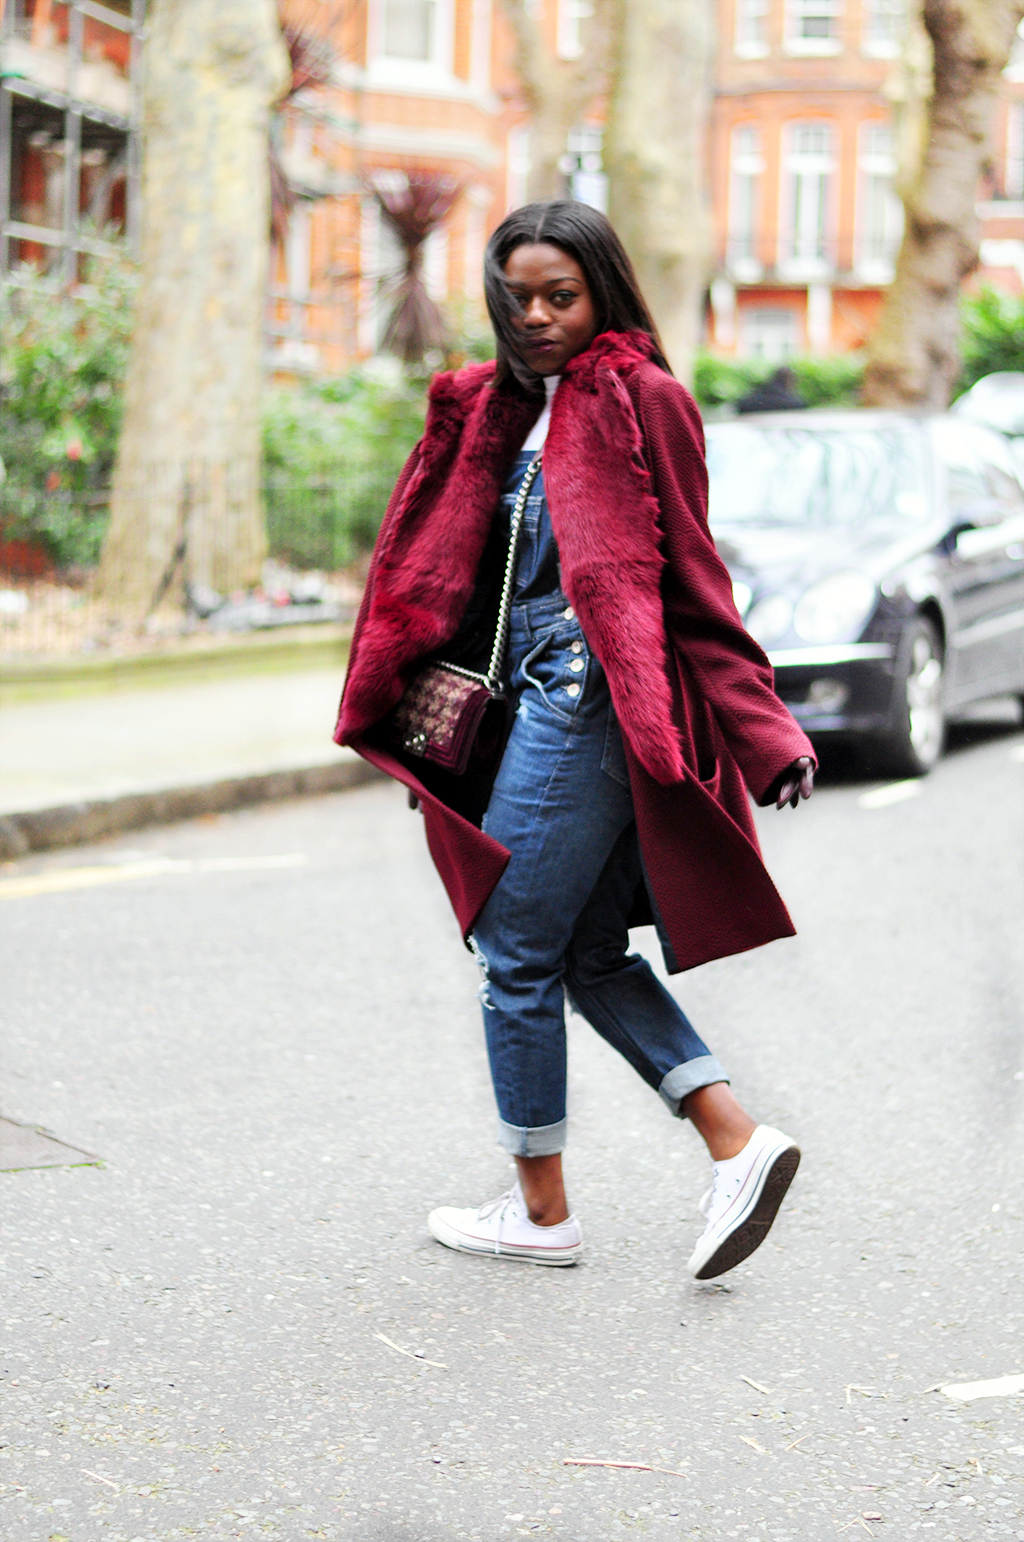 DUNGAREES PLEASE - Mirror Me | London Fashion, Travel & Personal ...